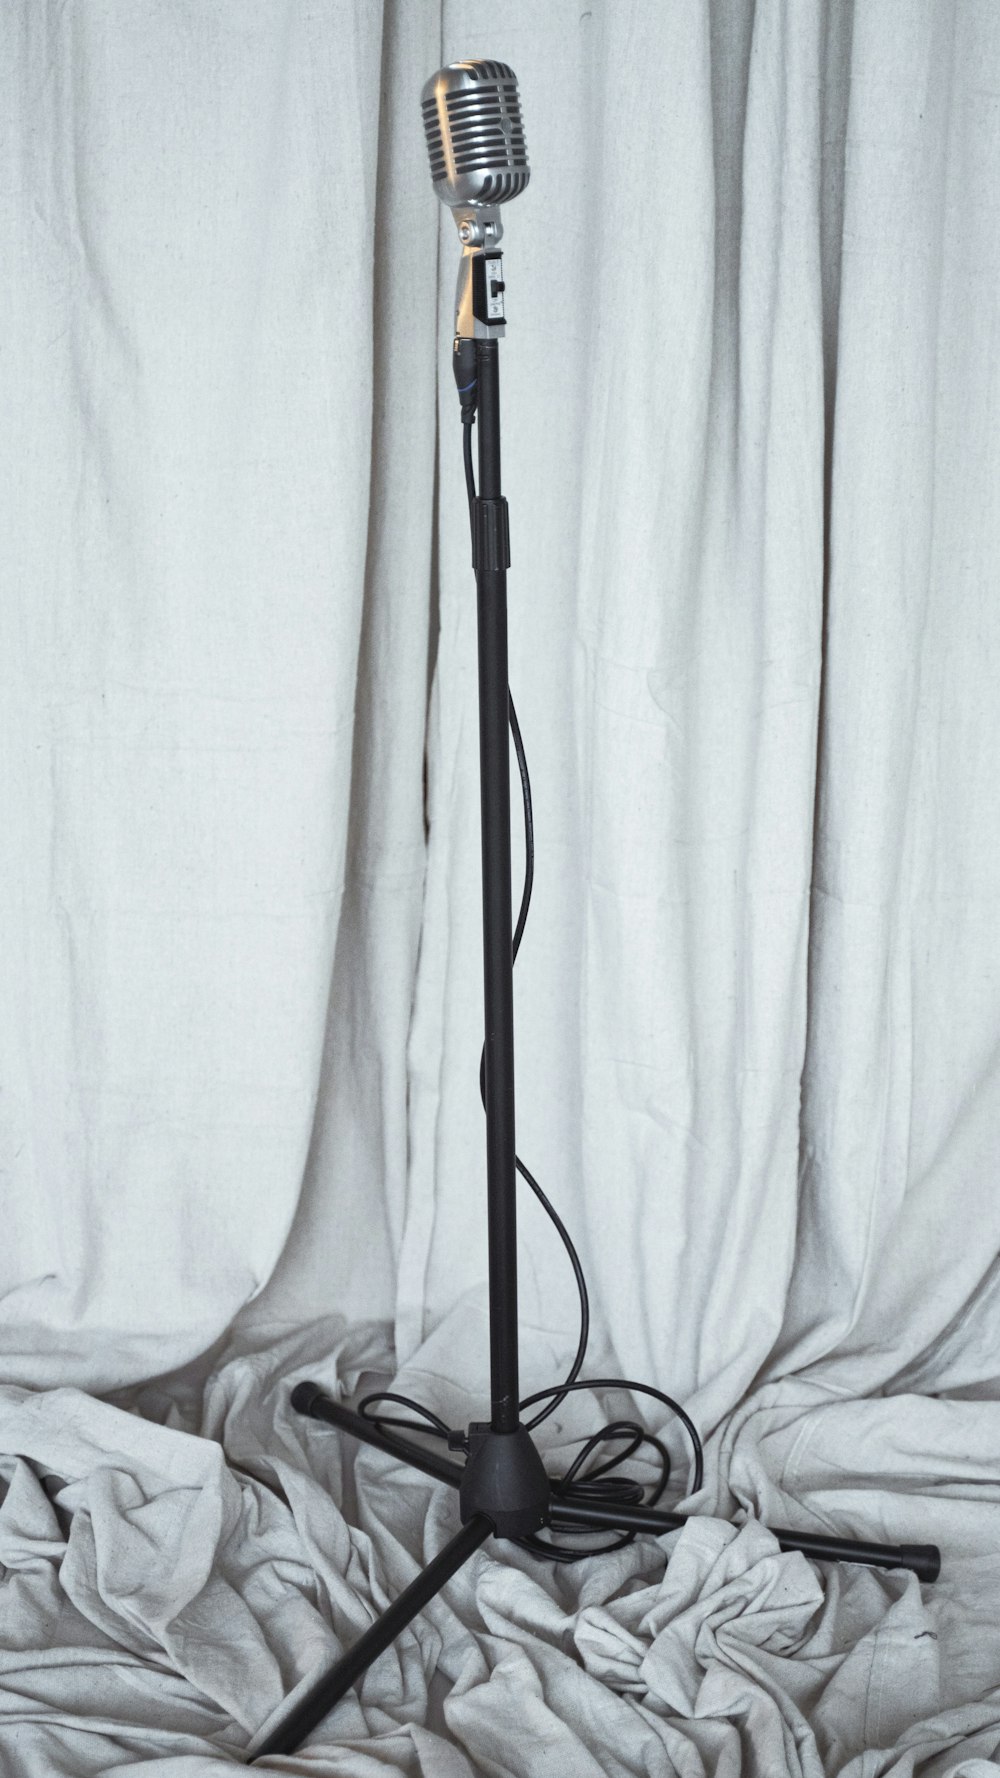 a microphone on a stand on a bed